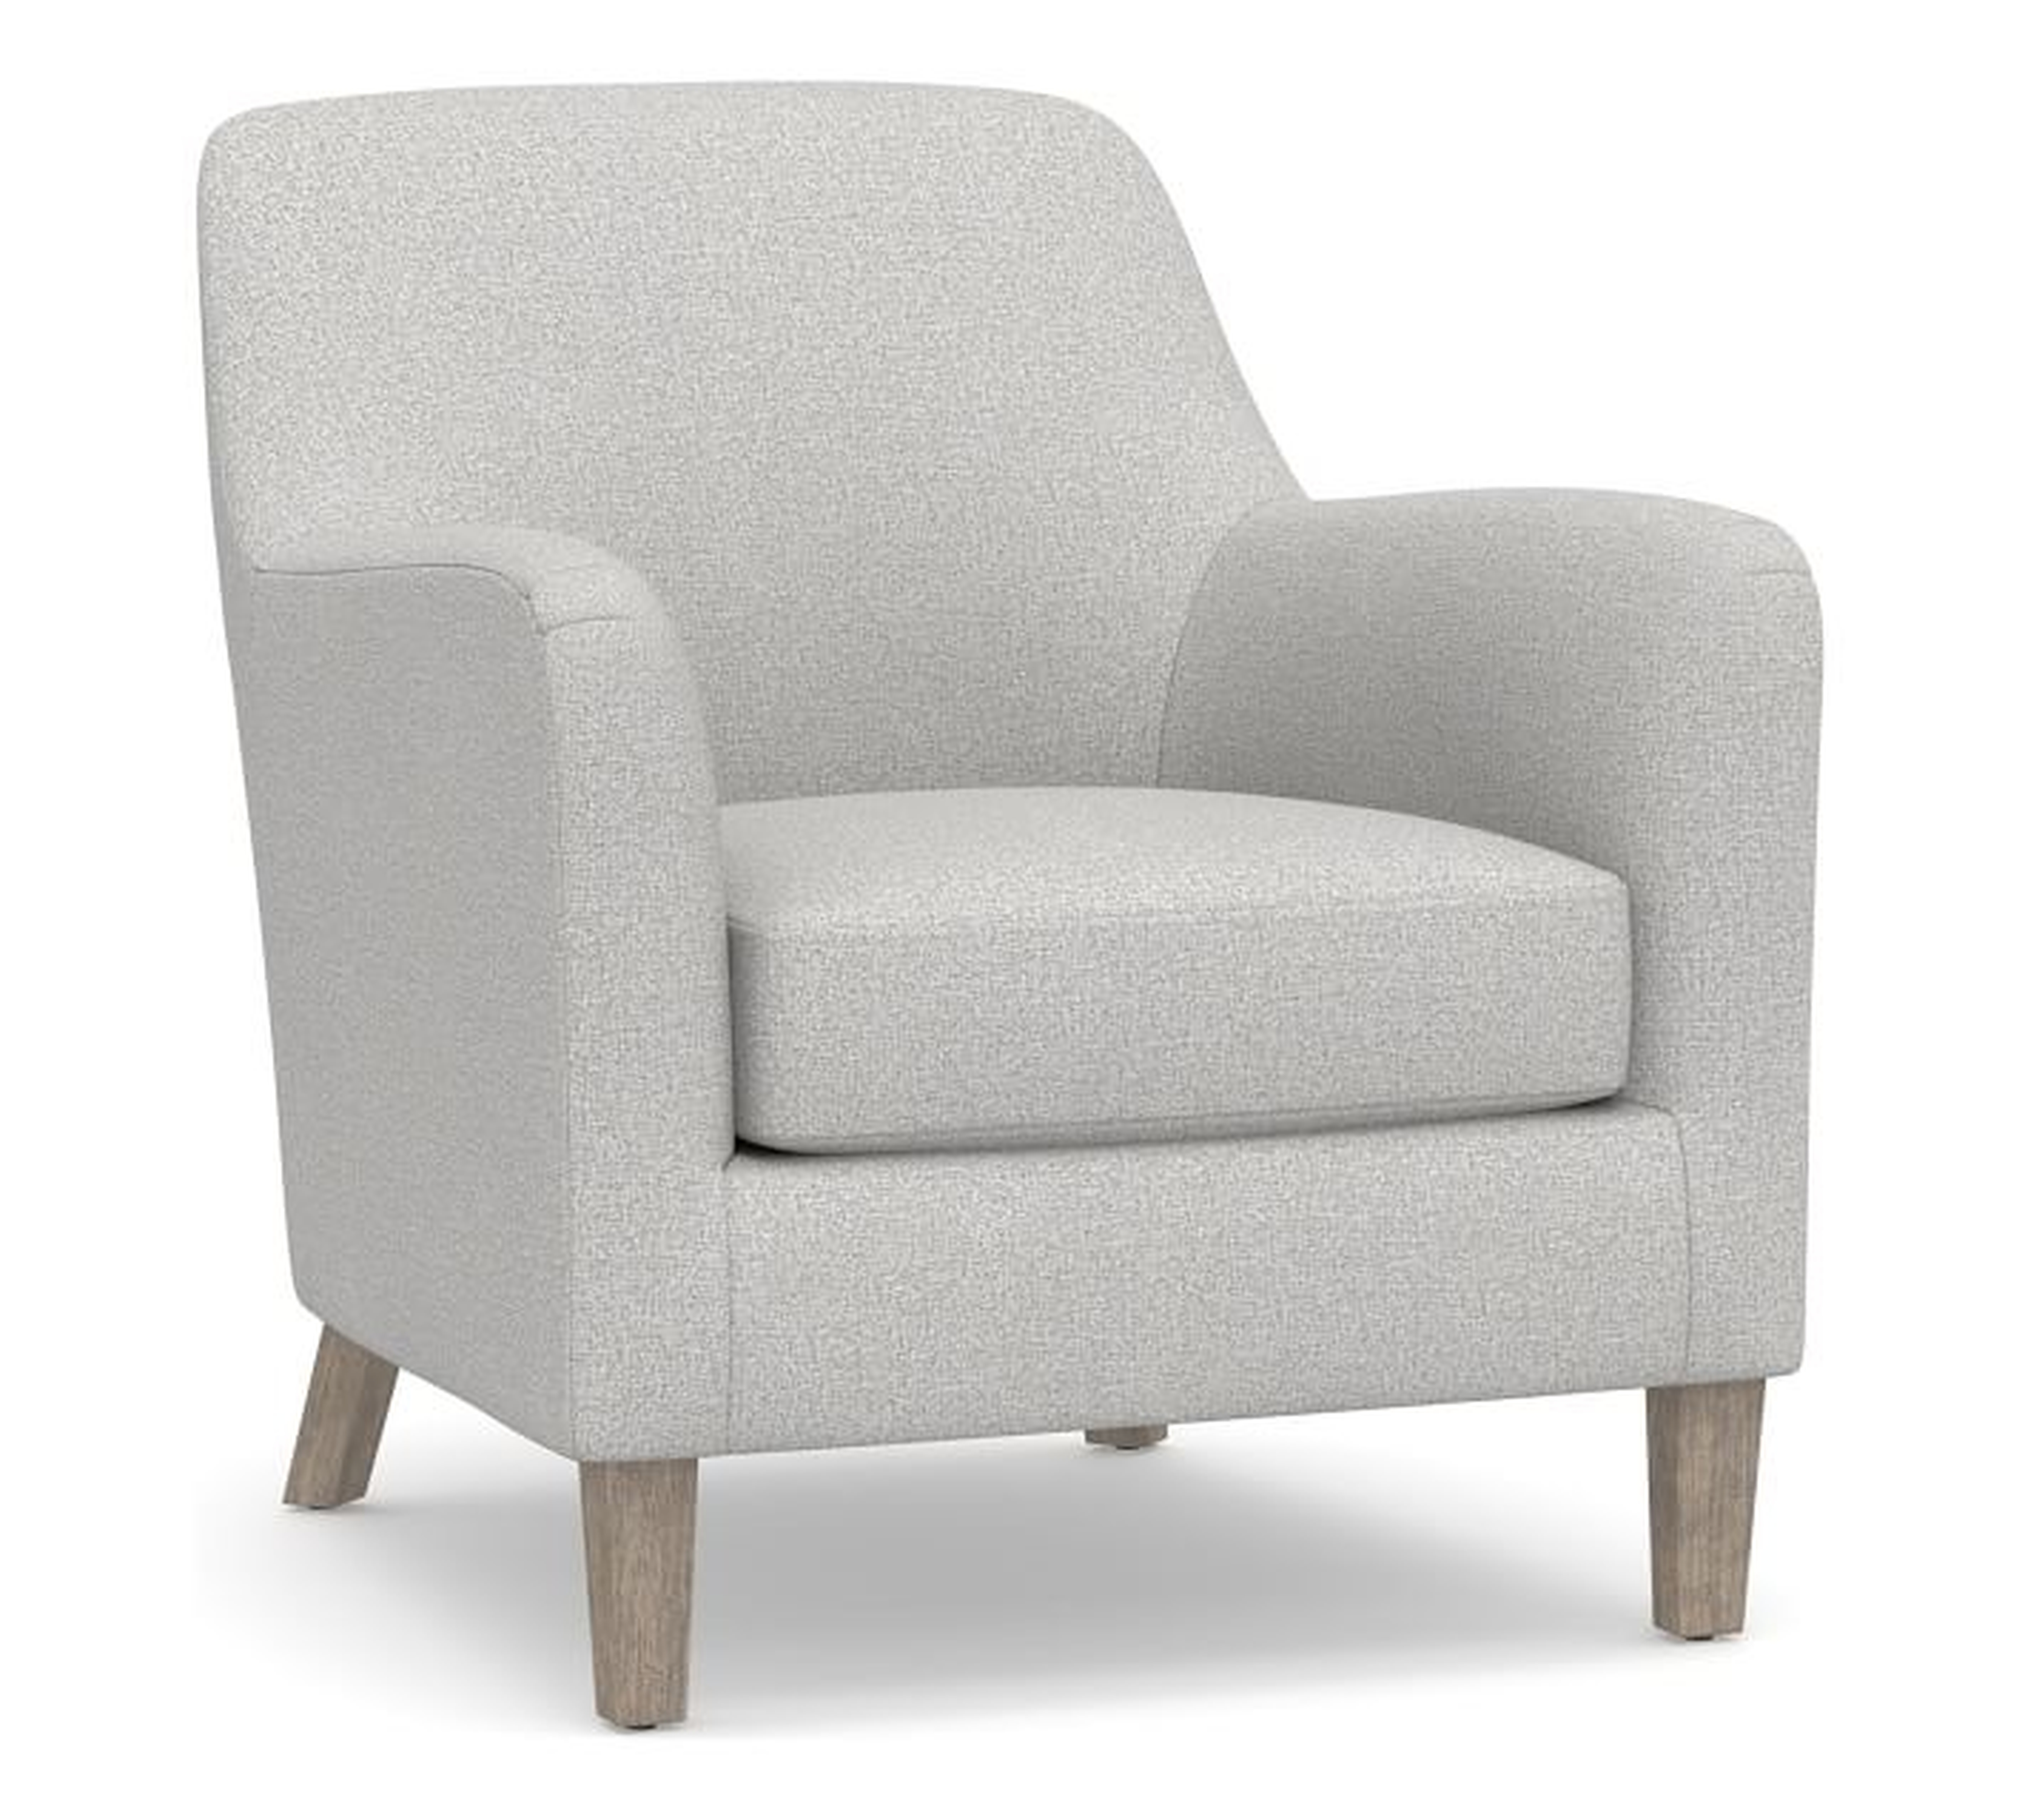 SoMa Burton Upholstered Armchair, Polyester Wrapped Cushions, Park Weave Ash - Pottery Barn